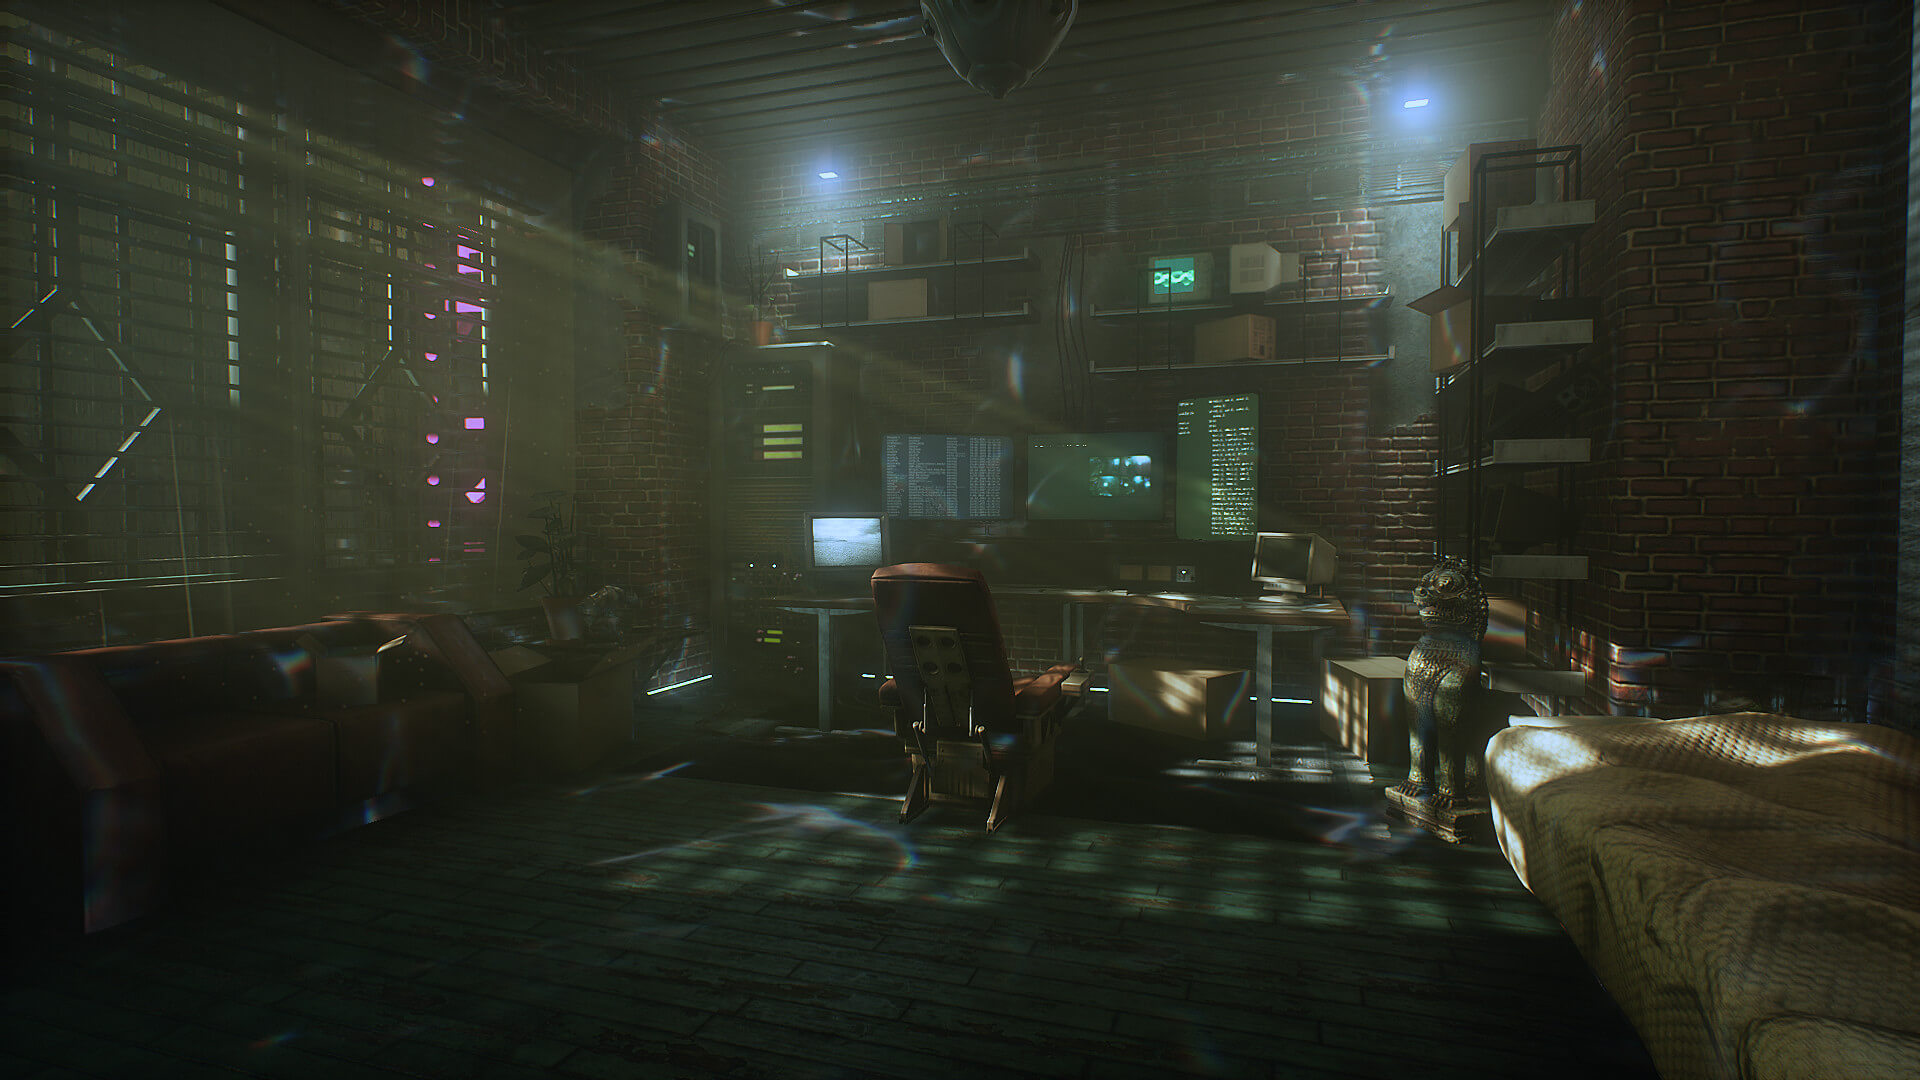 Transient Is A New Lovecraftian Sci Fi Game That Is Coming To The Pc In 2020